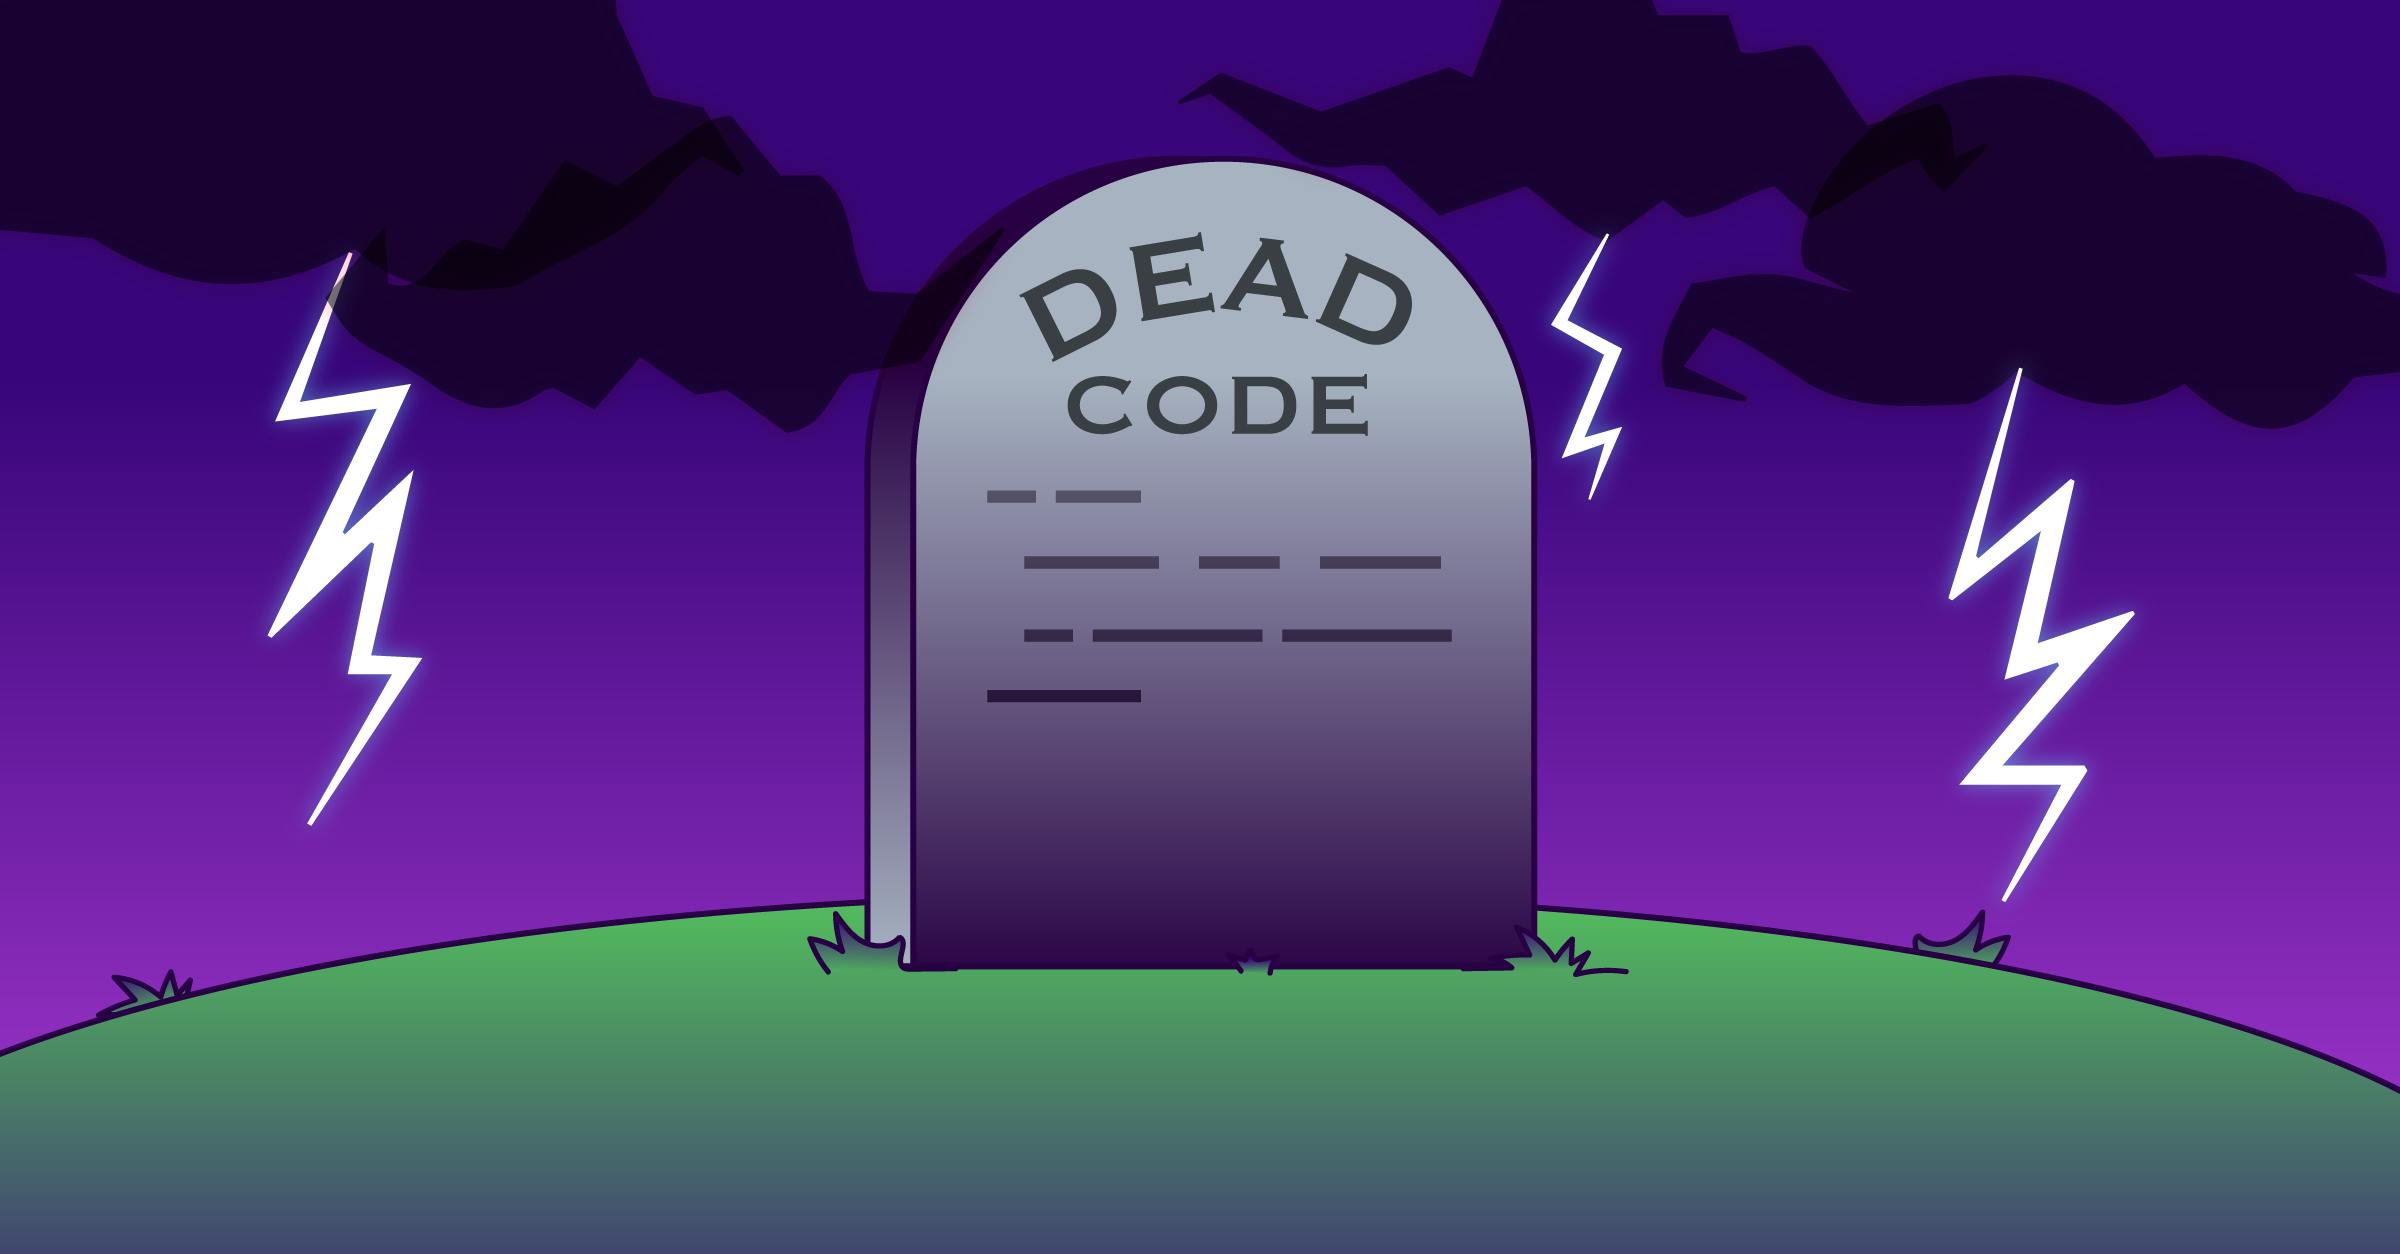 Lesser spotted React mistakes. Image of gravestone with Dead Code carved into it. Stormy night background.